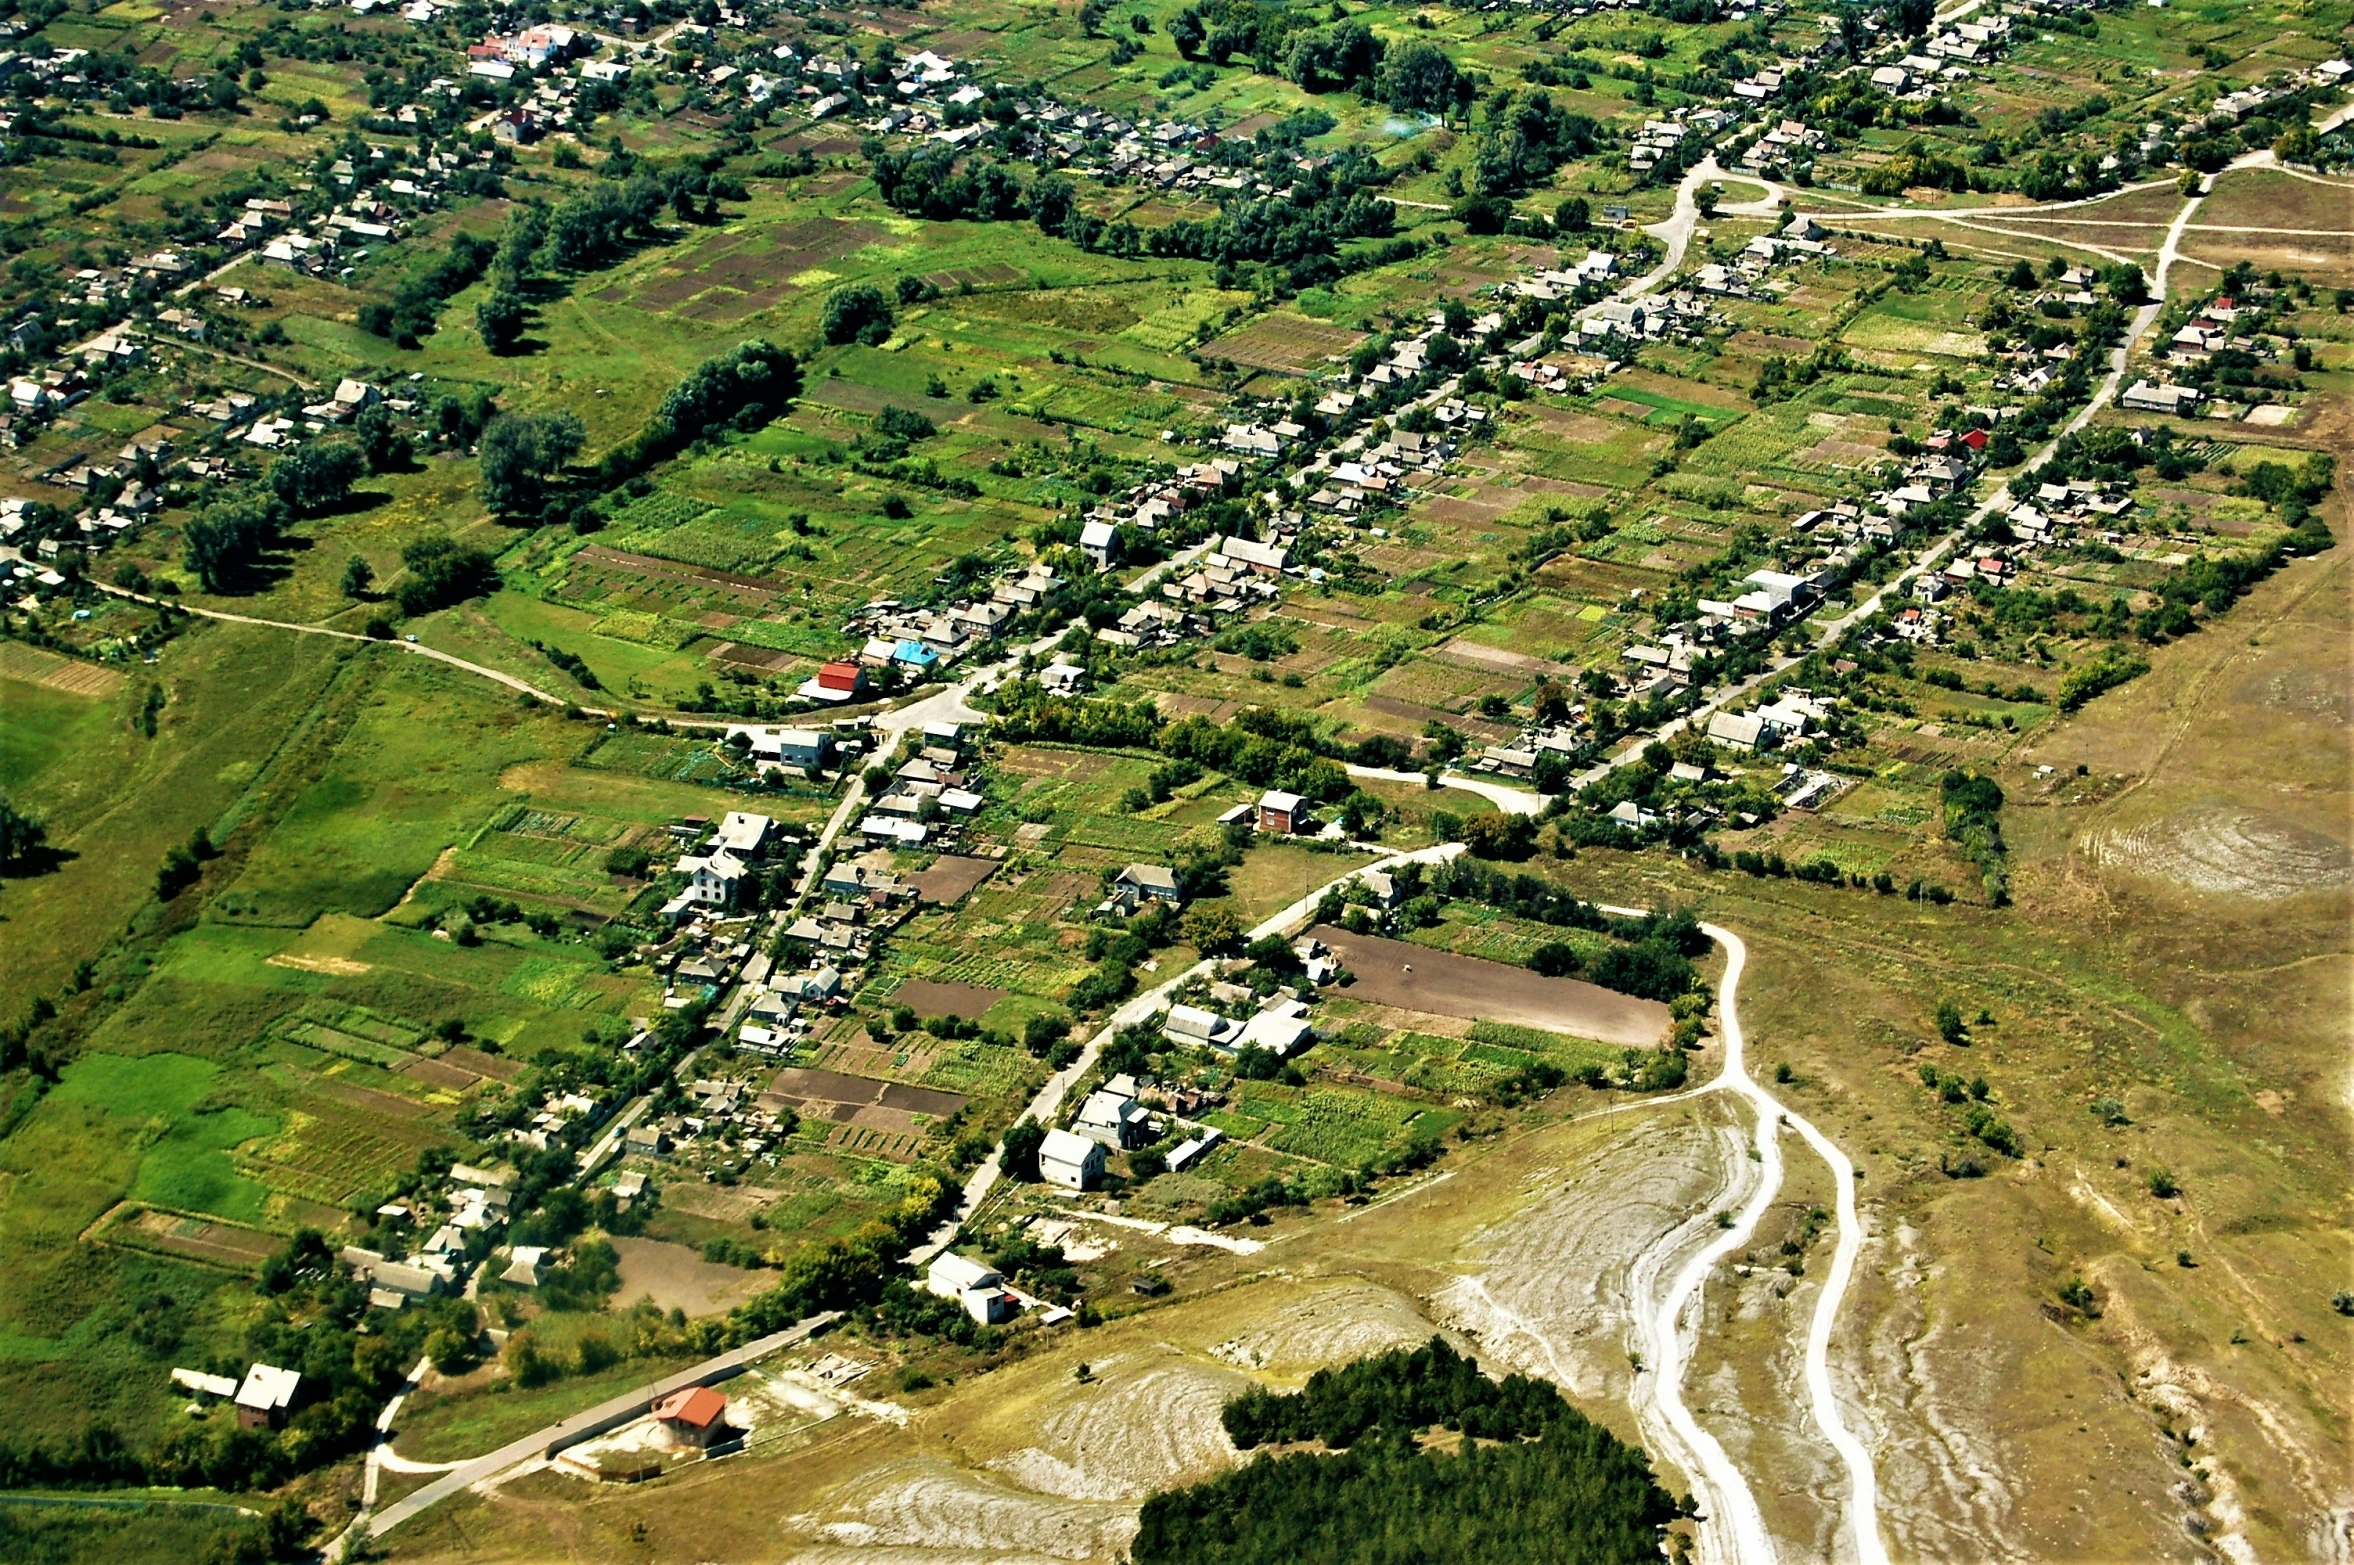 an aerial view of a large area, with many houses